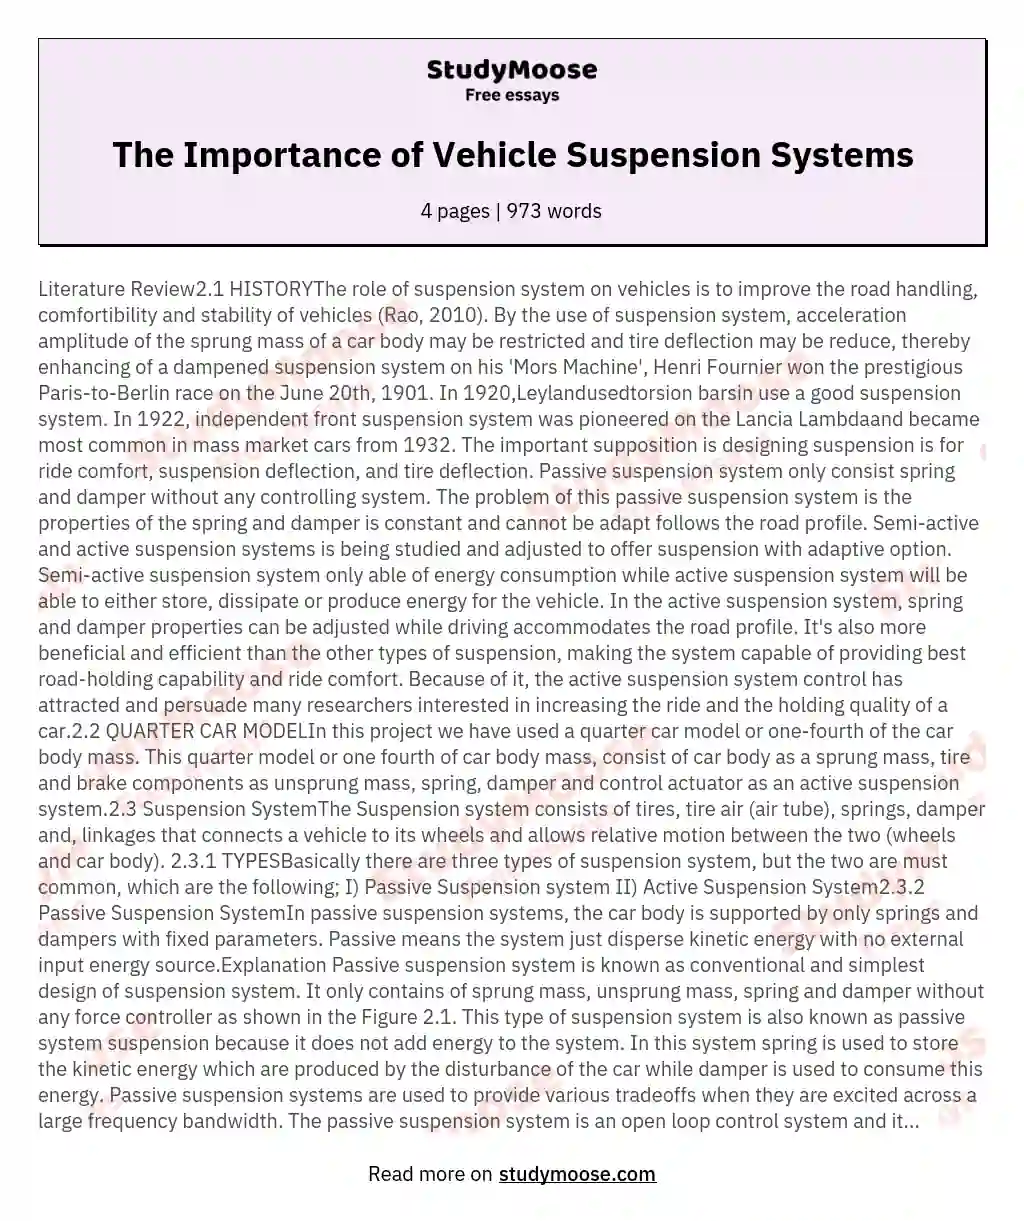 Literature Review21 HISTORYThe role of suspension system on vehicles is to improve